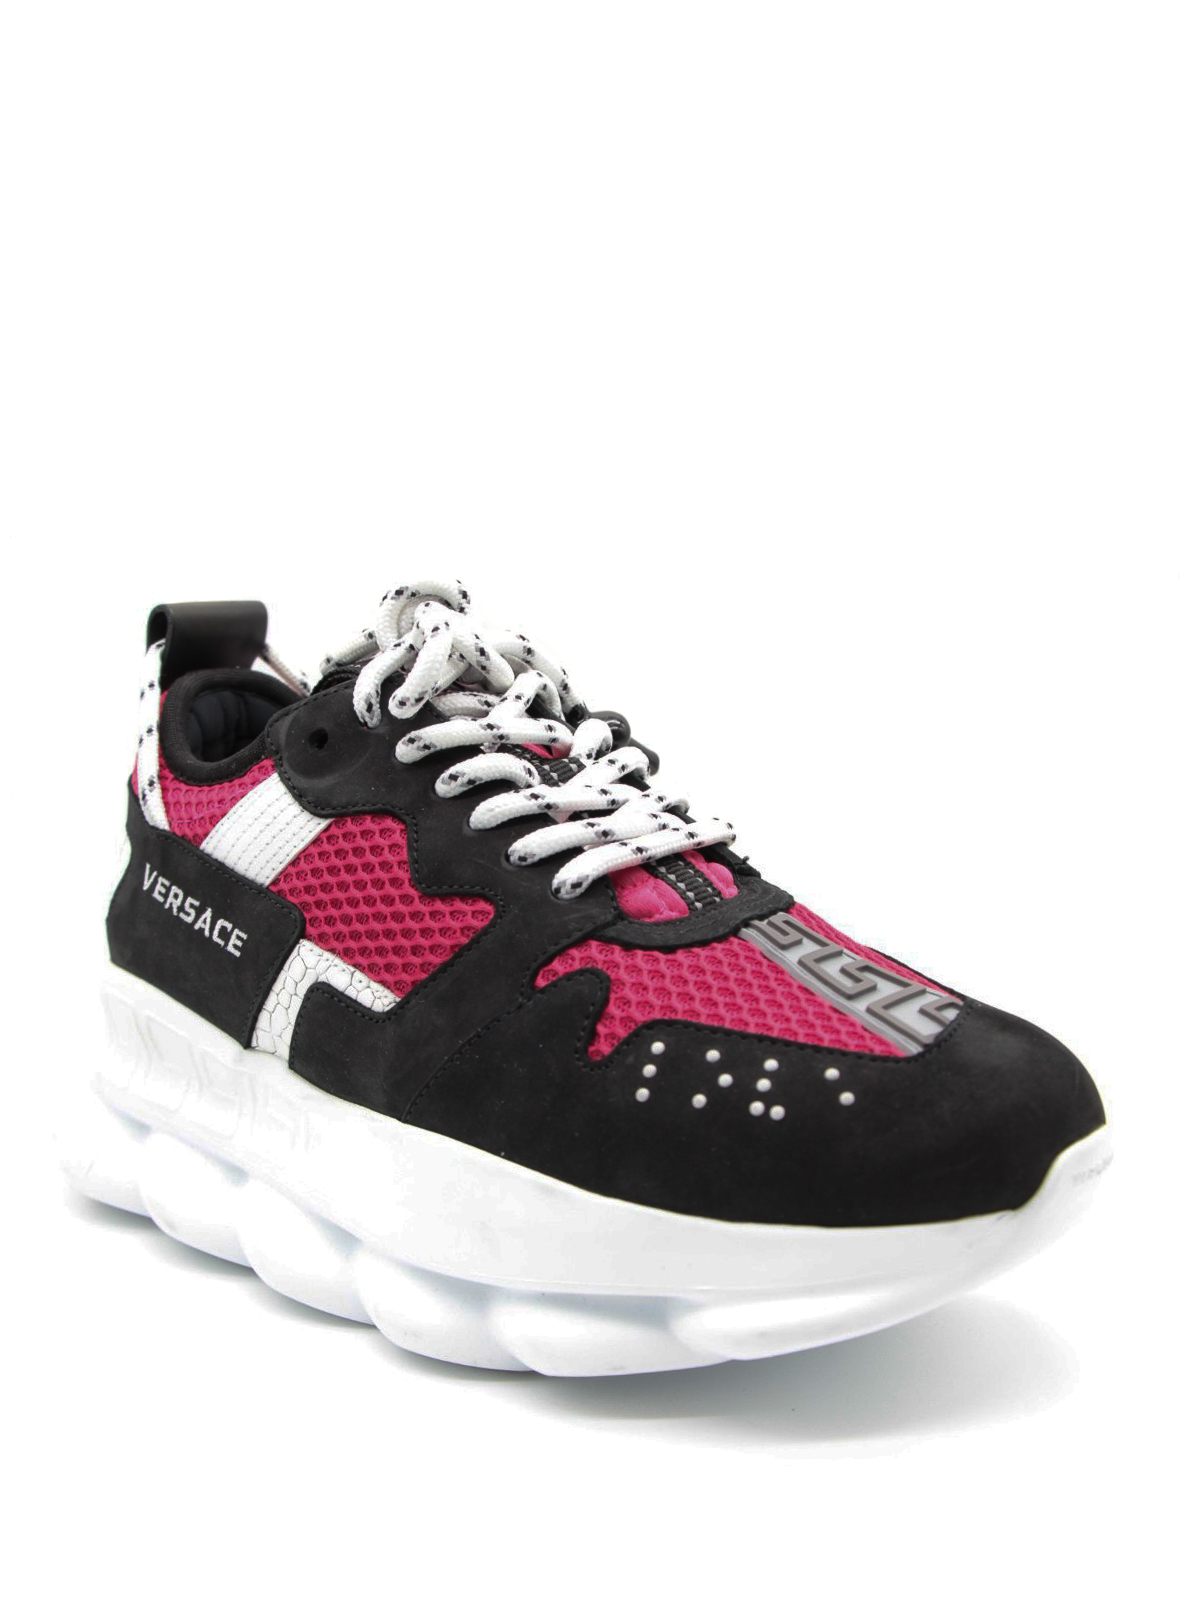 chain reaction 2 sneakers